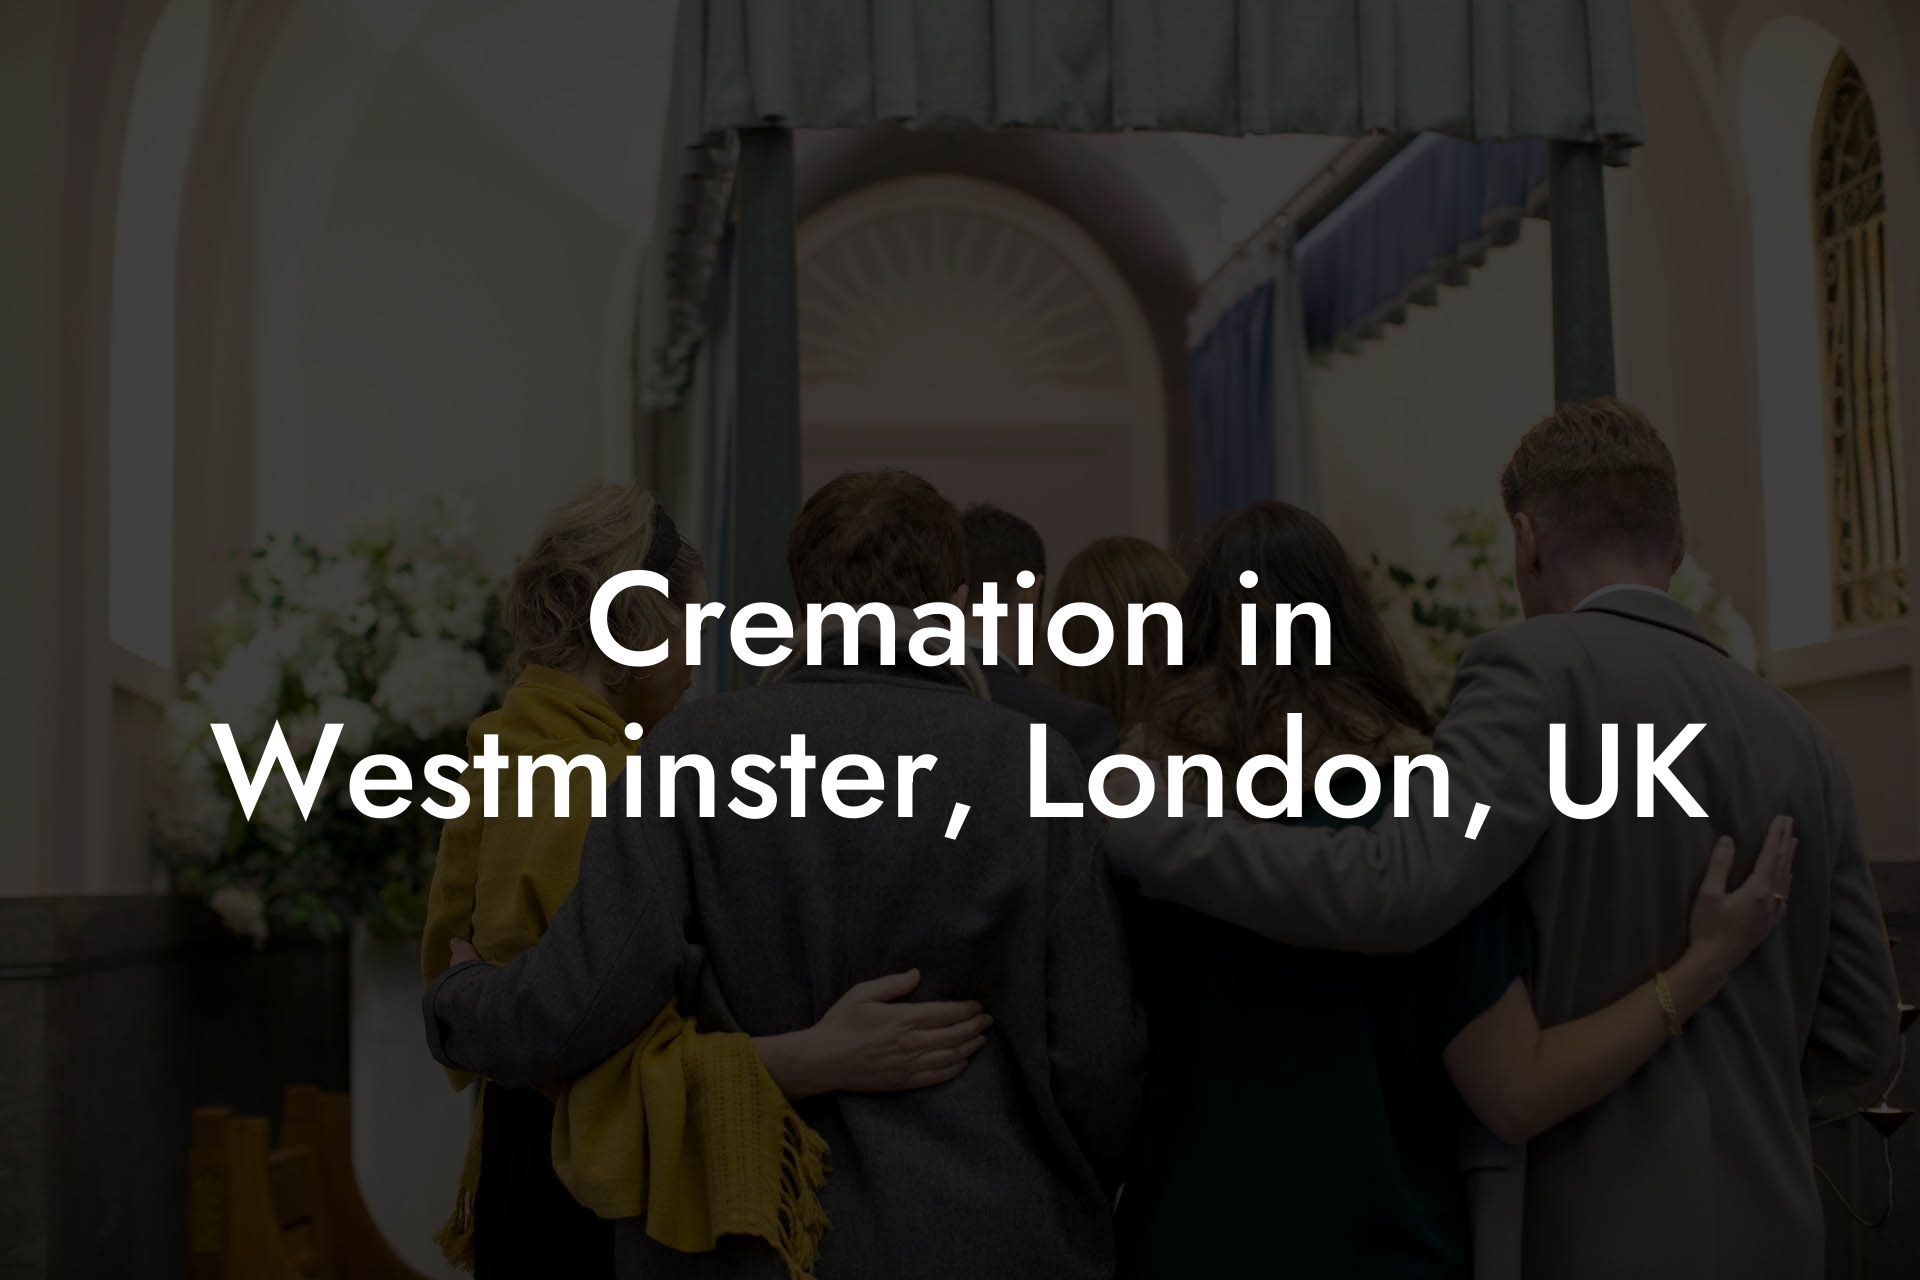 Cremation in Westminster, London, UK